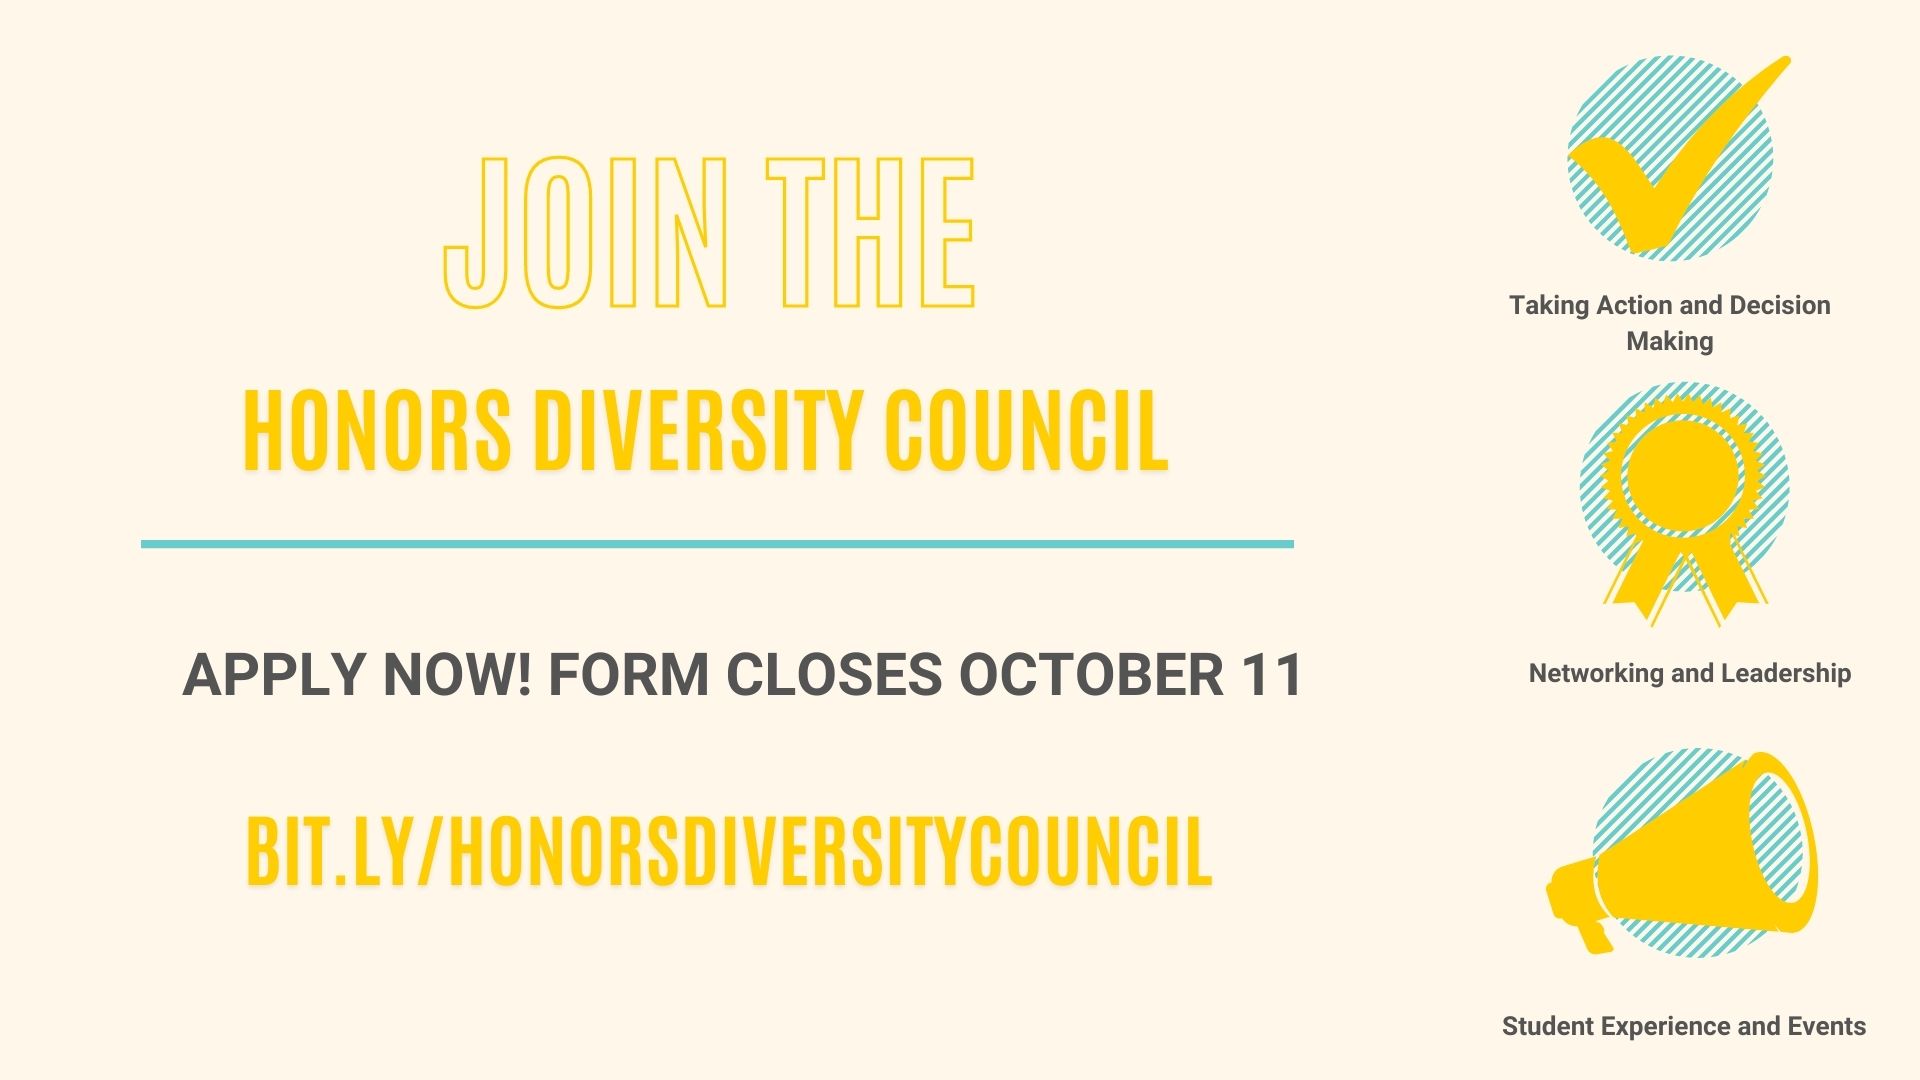 Join the Honors Diversity Council! https://bit.ly/honorsdiversitycouncil